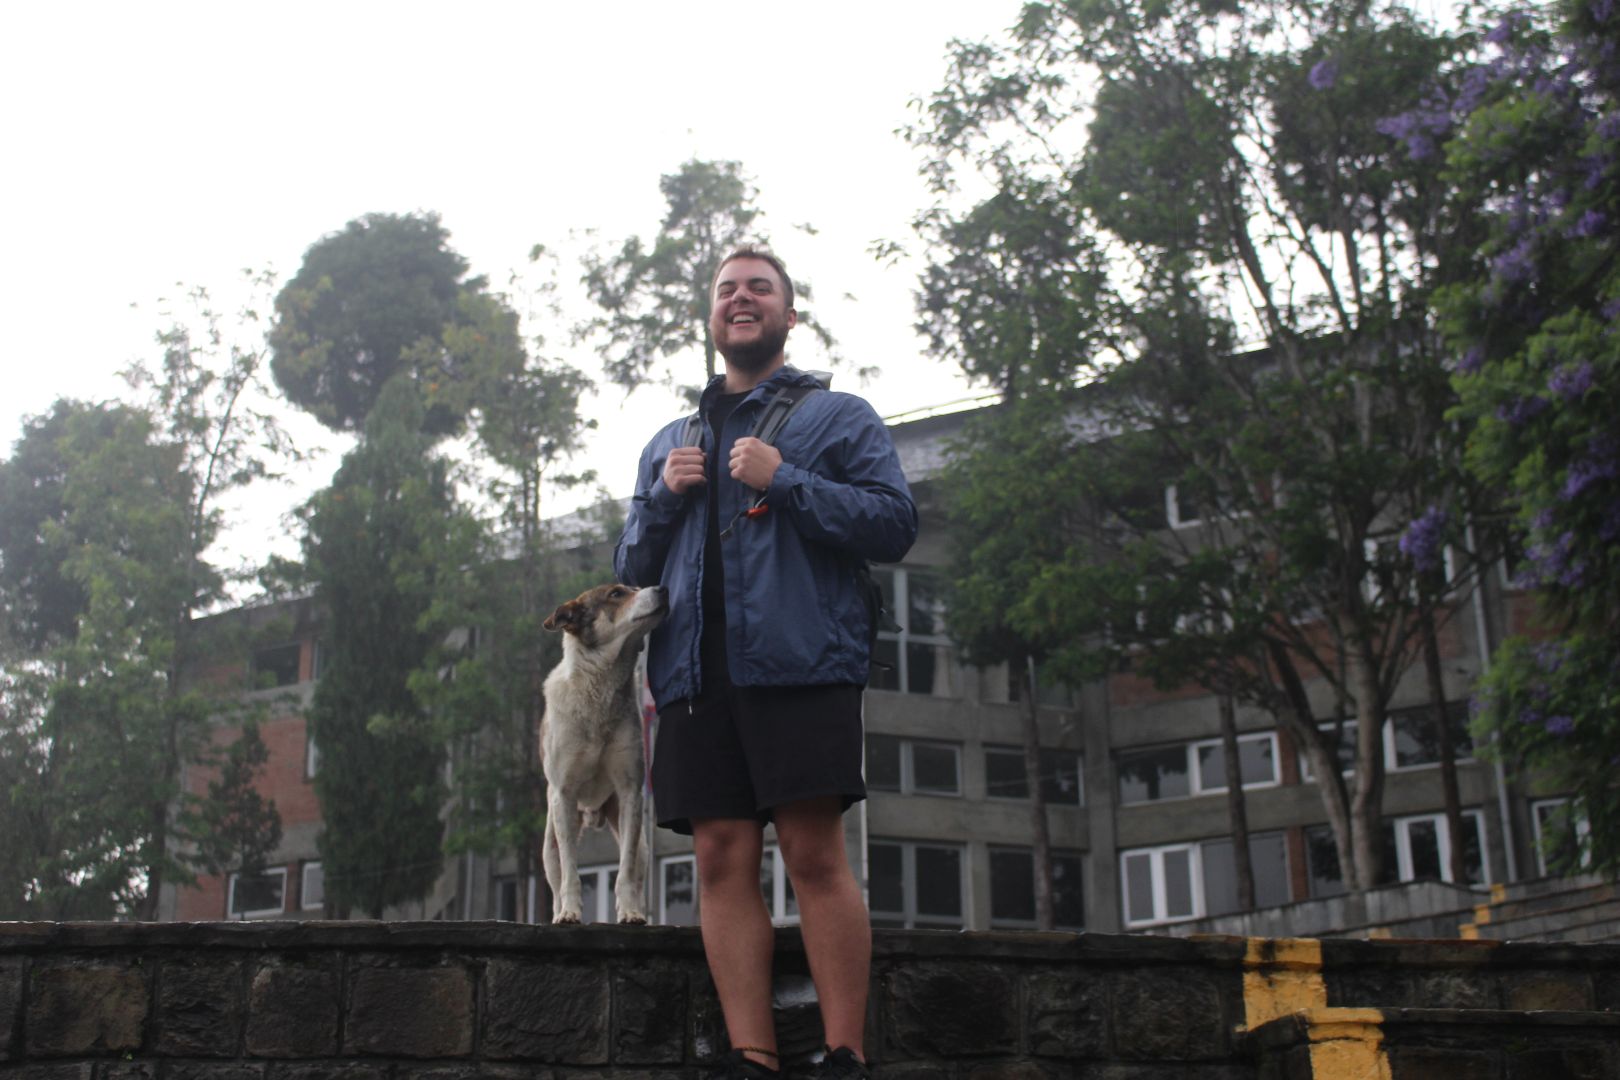 Zachary standing with dog in Nepal